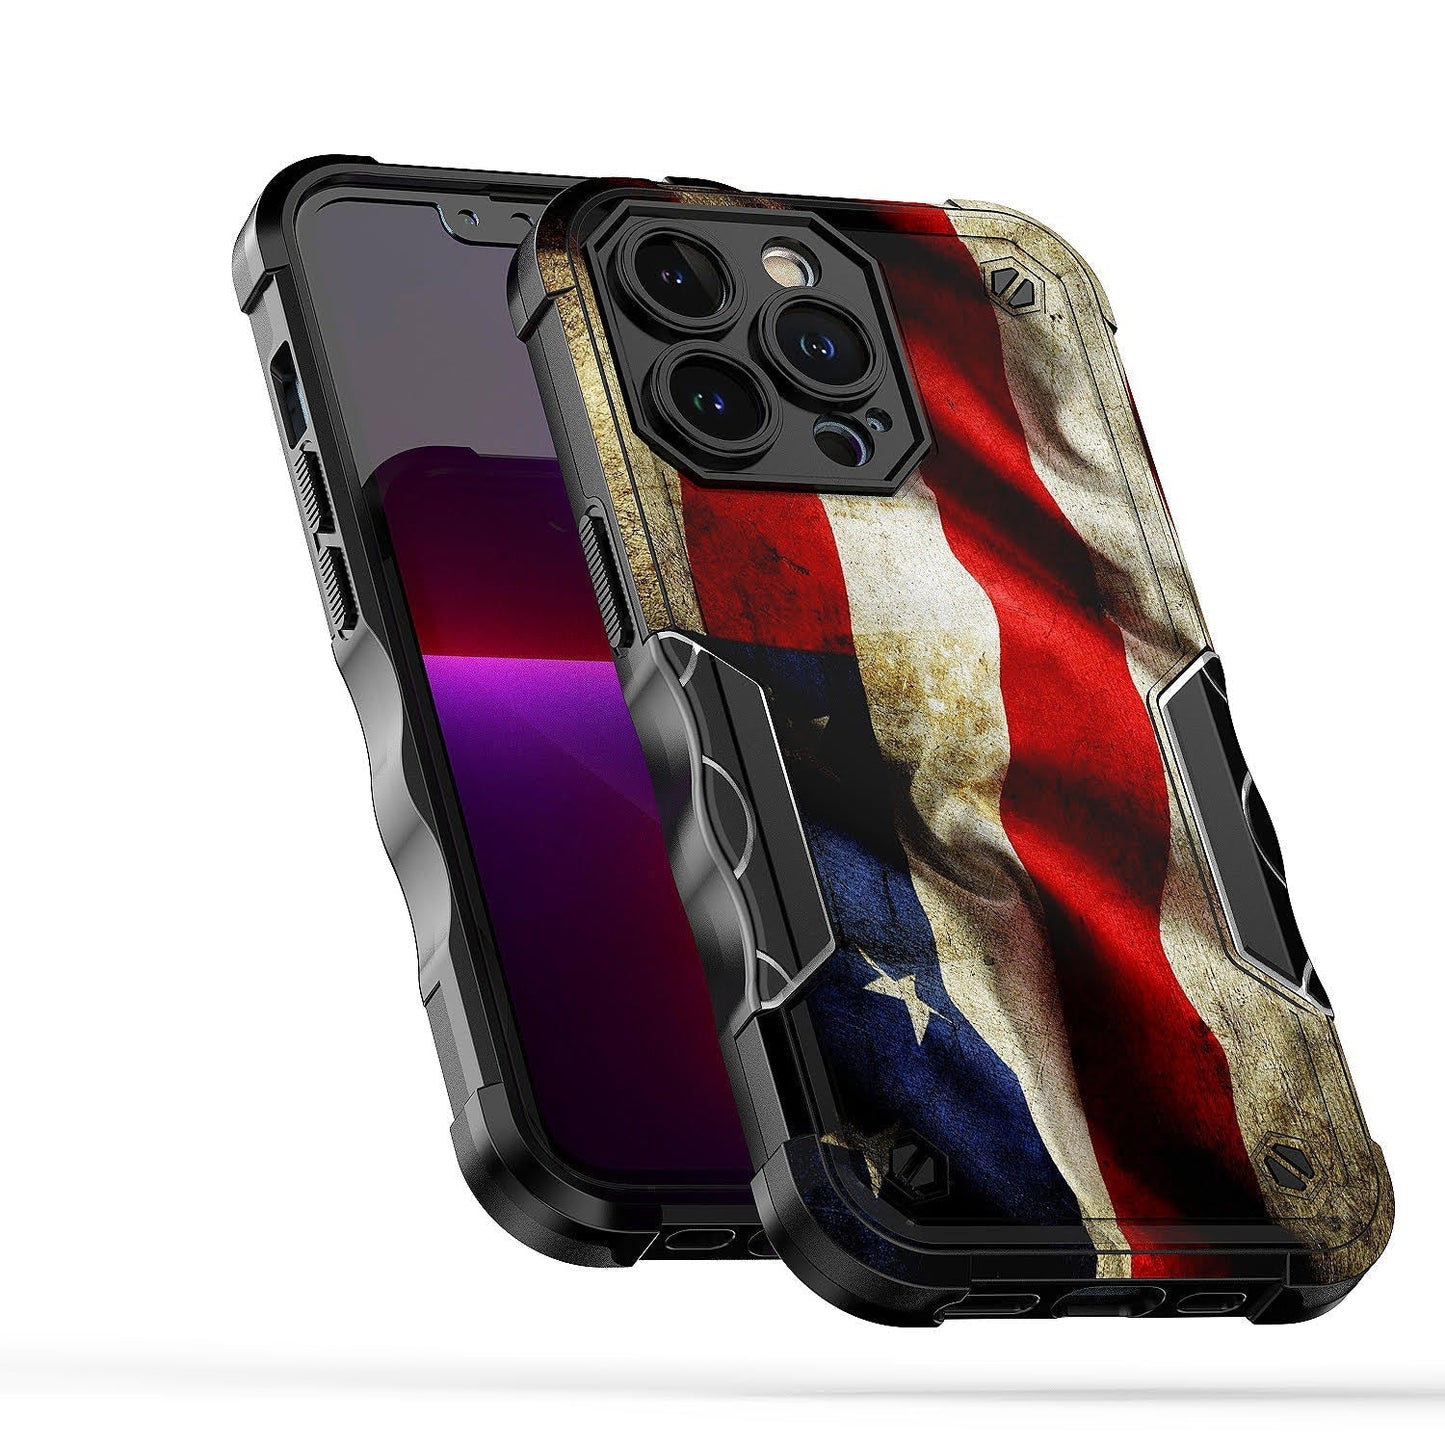 Case For Apple iPhone 14 Pro - Hybrid Grip Design Shockproof Phone Cover - American Flag